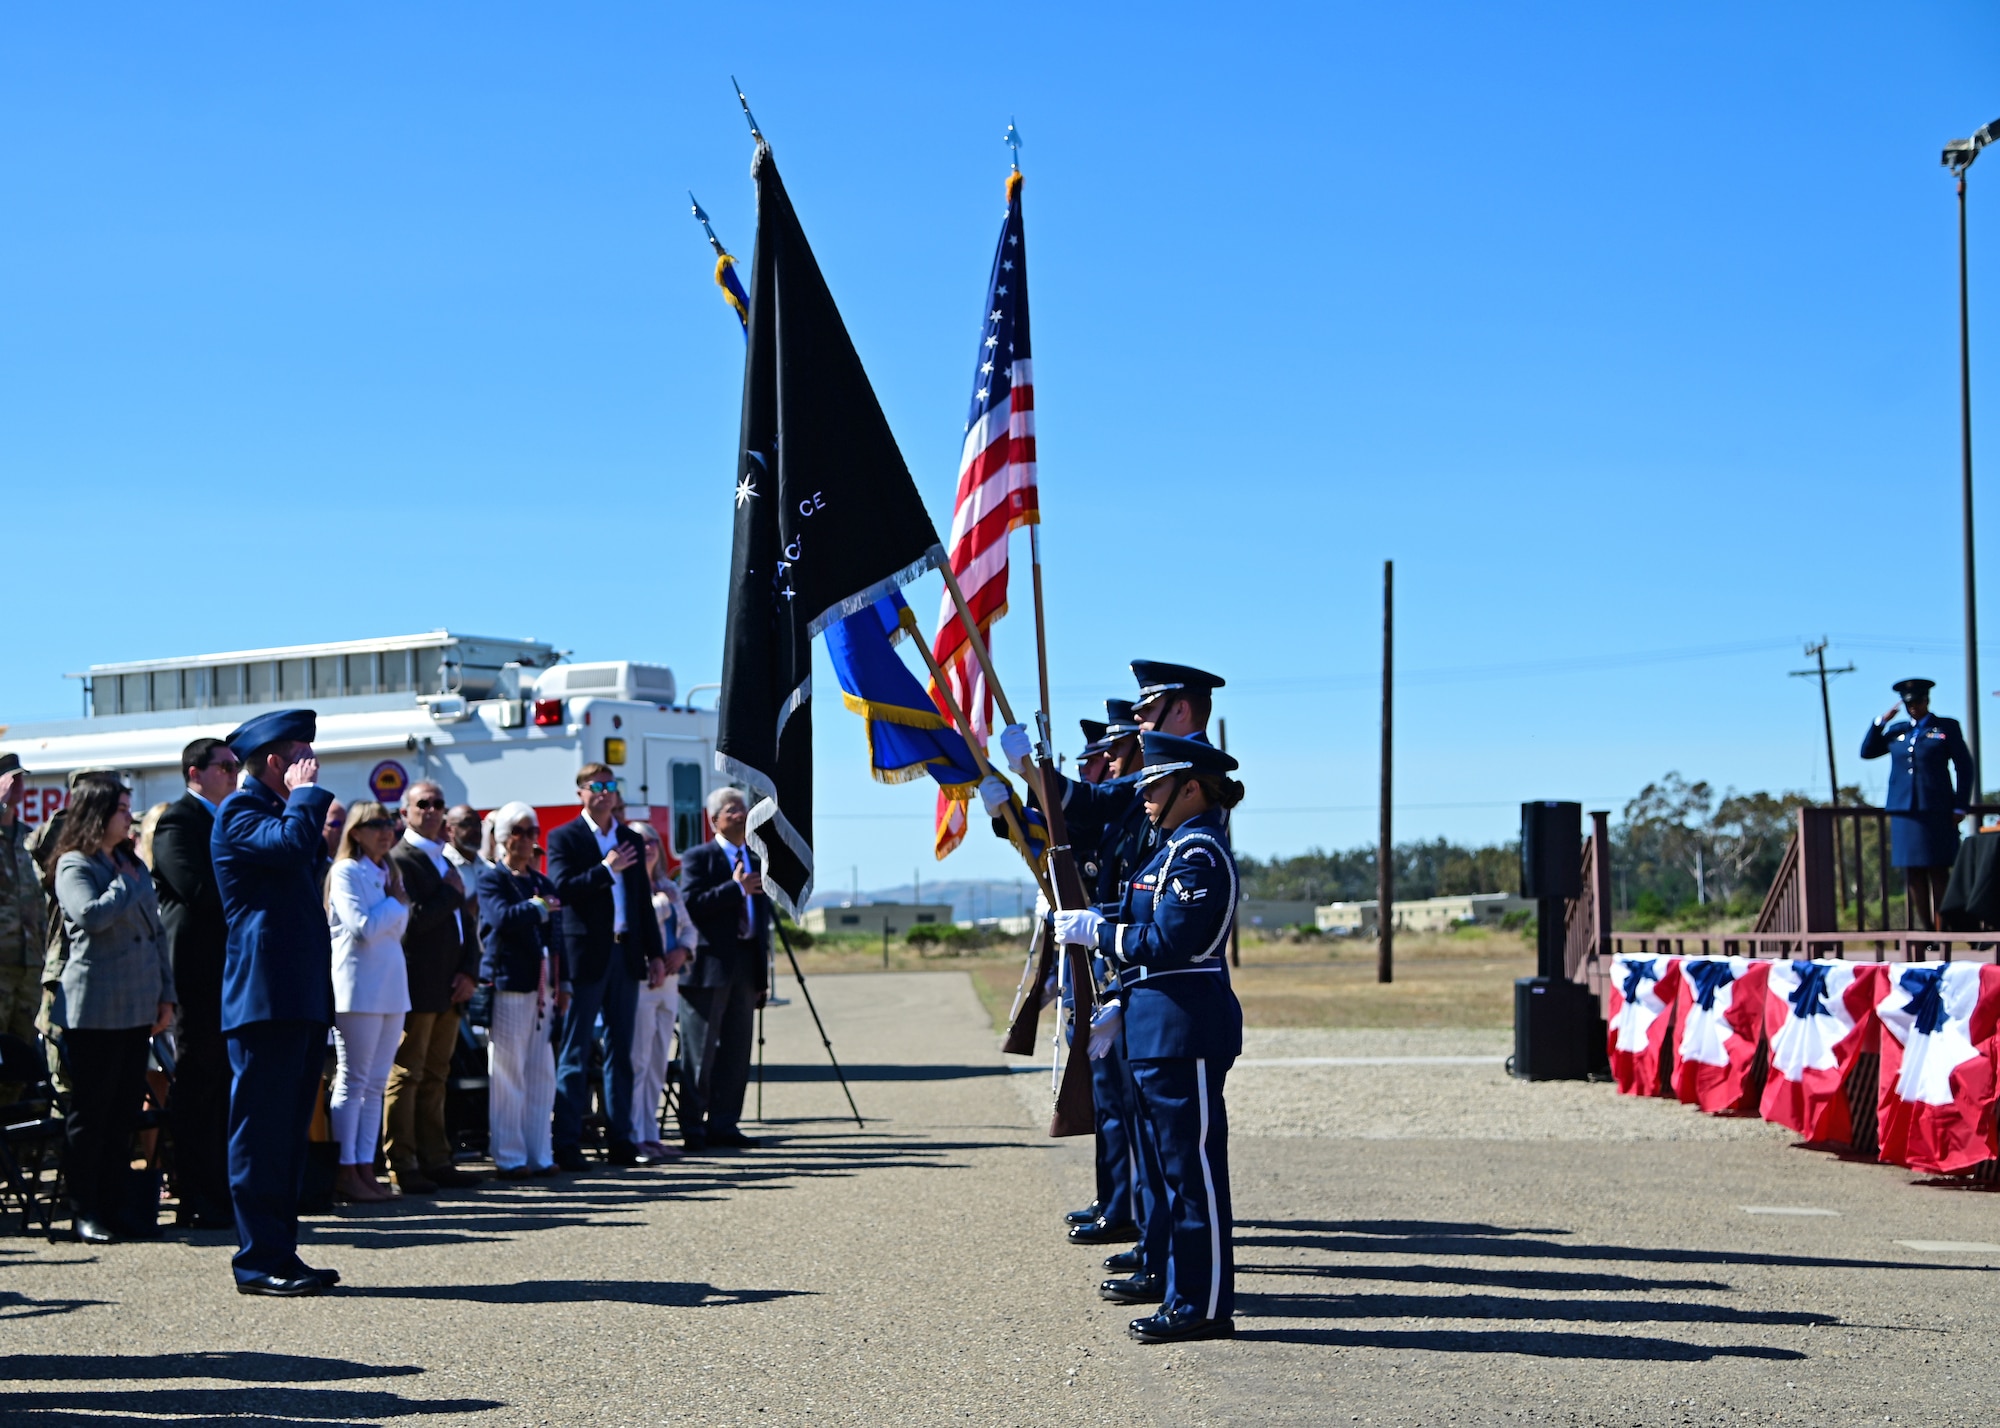 The Vandenberg Space Force Base Honor Guard presents the colors during the Space Launch Delta 30 change of command ceremony on Vandenberg Space Force Base, Calif., July 13, 2023. U.S. Space Force Col. Robert Long relinquished command to U.S. Space Force Col. Mark Shoemaker. U.S. Space Force Lt. Gen. Michael Guetlein, Space Systems Command commander, presided over the ceremony. (U.S. Space Force photo by Airman 1st Class Ryan Quijas)